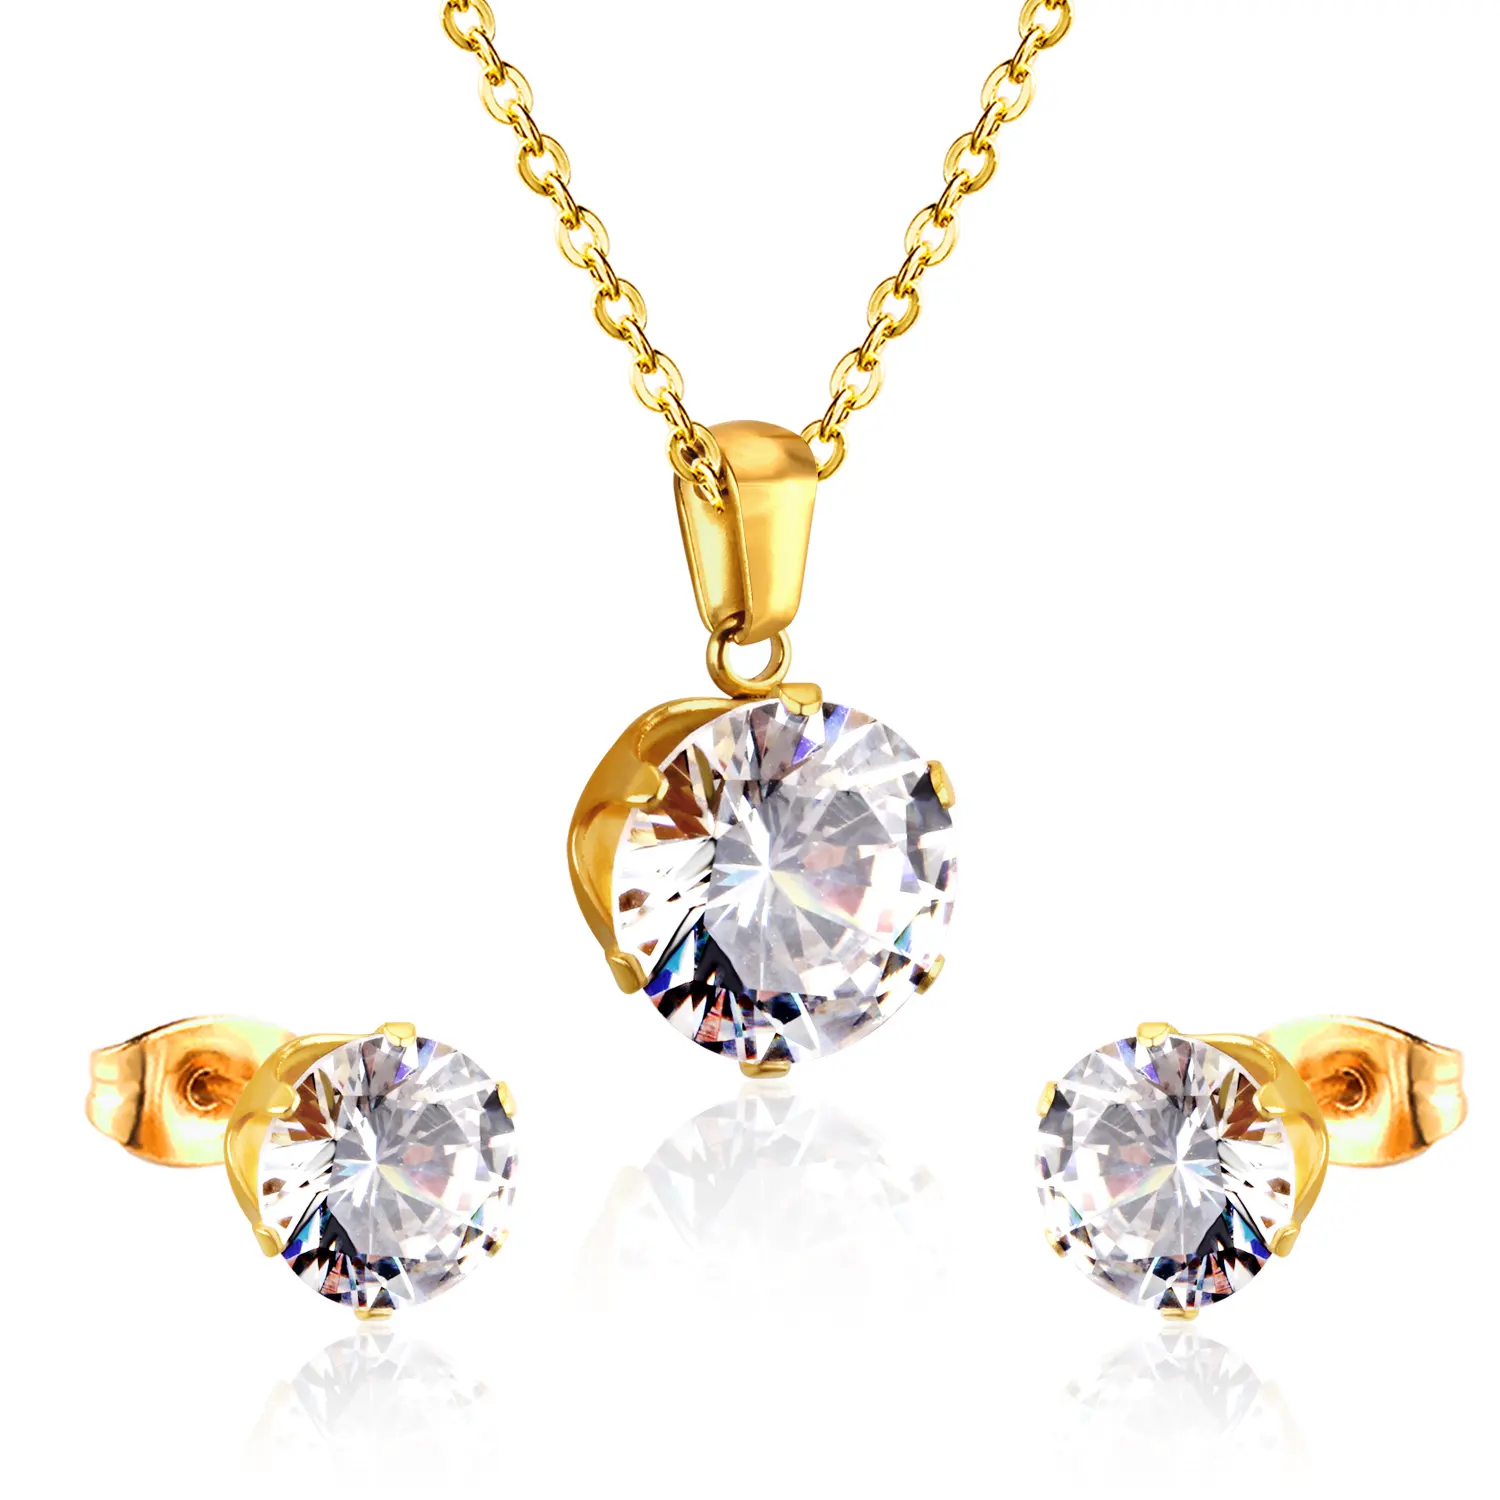 Shiny Carving Circle Cubic Zircon Earrings Necklace Jewelry Set Fashion 18k Gold Plated Female Jewelry Set Wedding Bride